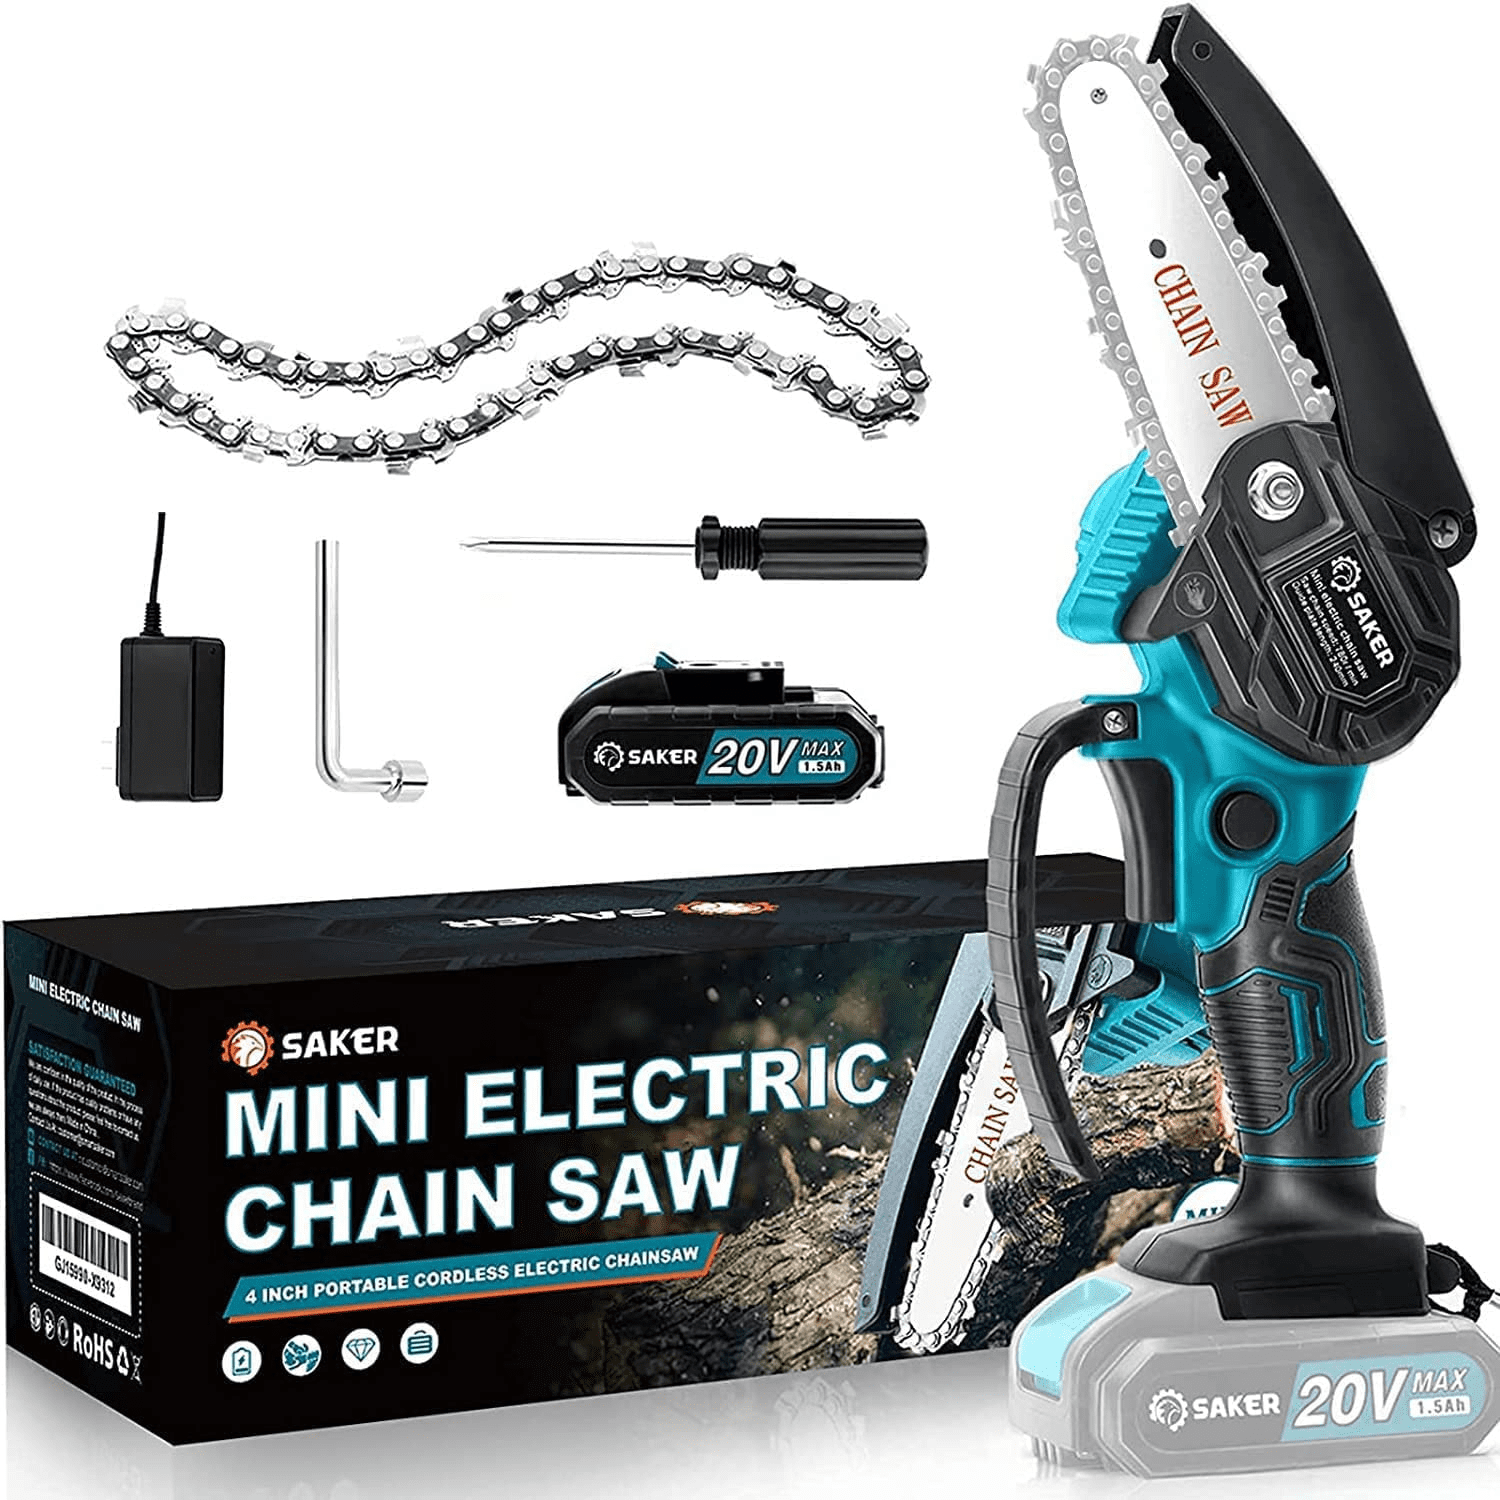 Garden and Ranch DEREAL Pro 25.4cc Gas-Chainsaw One-Hand Chainsaw Lightweight 2 Stroke Cycle Gasoline Powered Chain Saws Cordless Handheld Petrol Chainsaws Optional 12 inch Power Chain Saws for Farm 